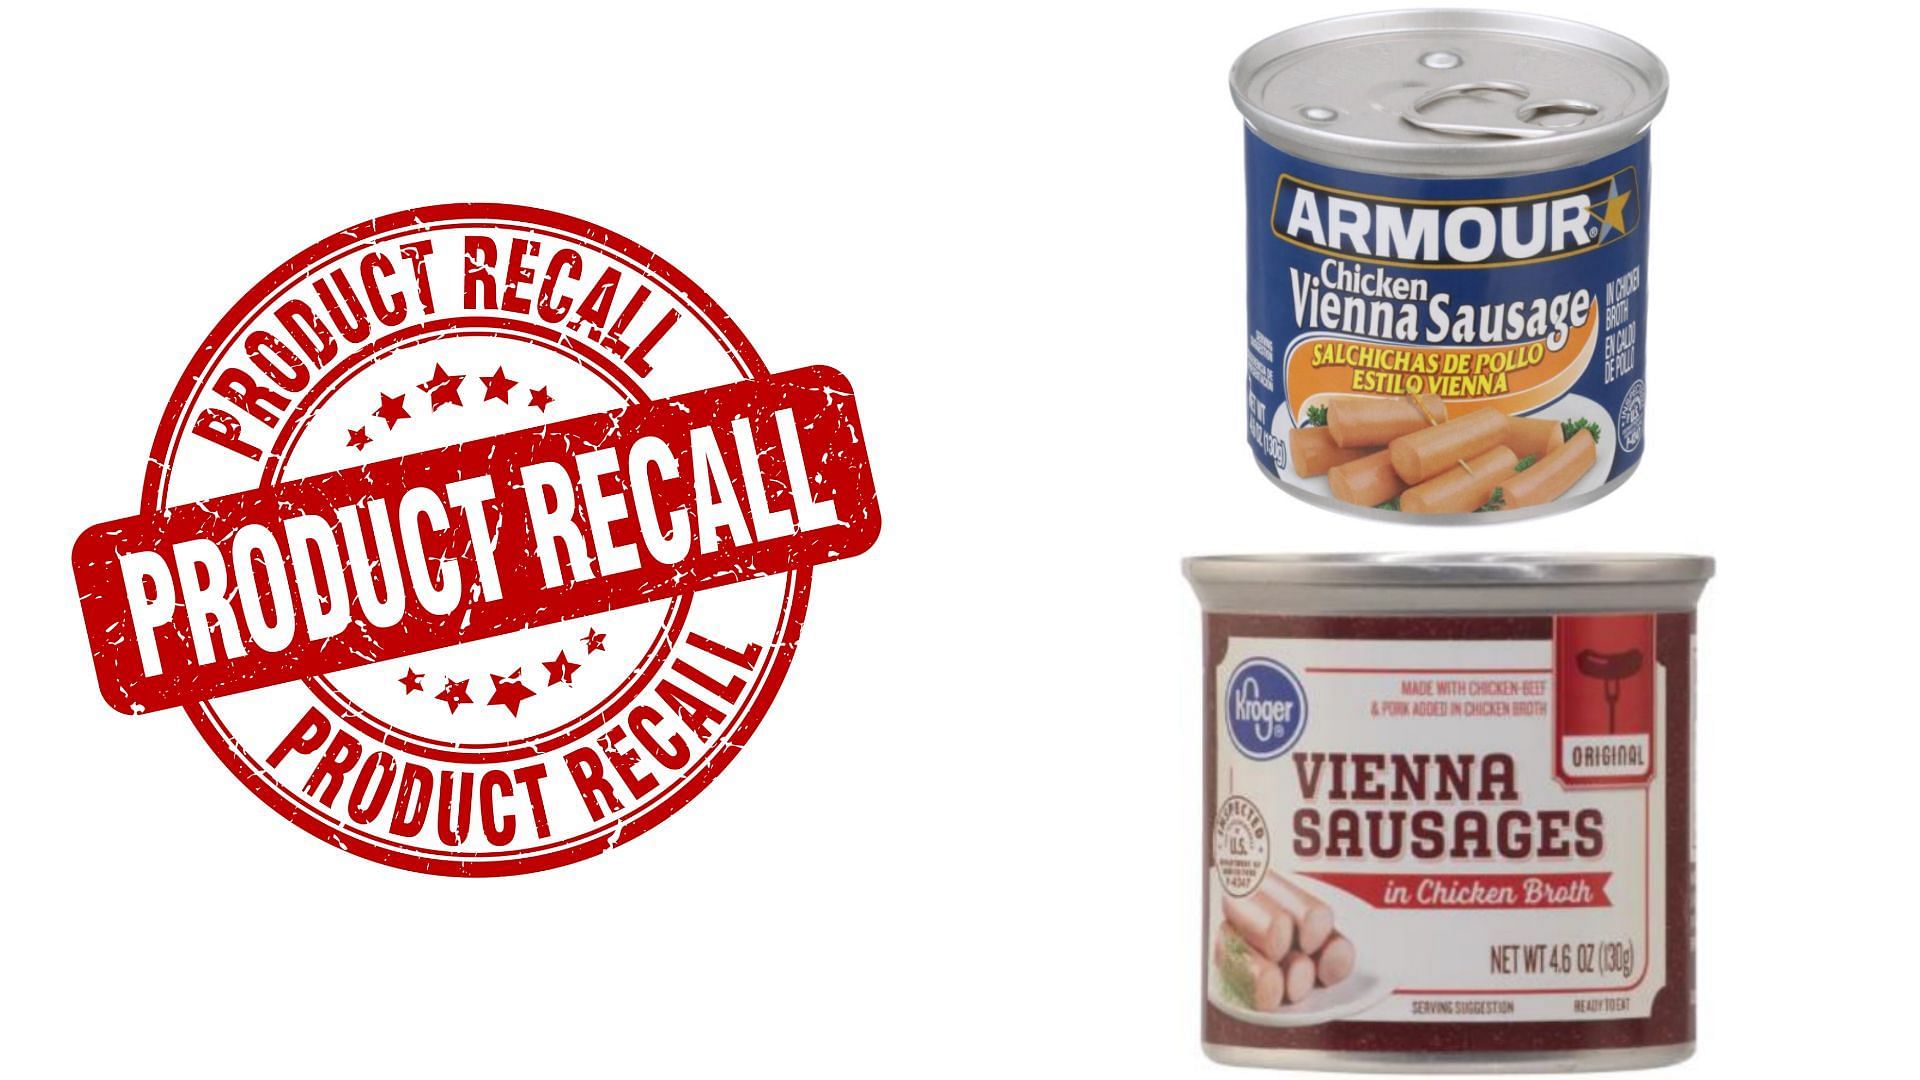 Conagra Brands, Inc. has recalled over 2.6 million canned meat and poultry products over concerns about a packaging defect that may cause the products to get contaminated (Image via FSIS)